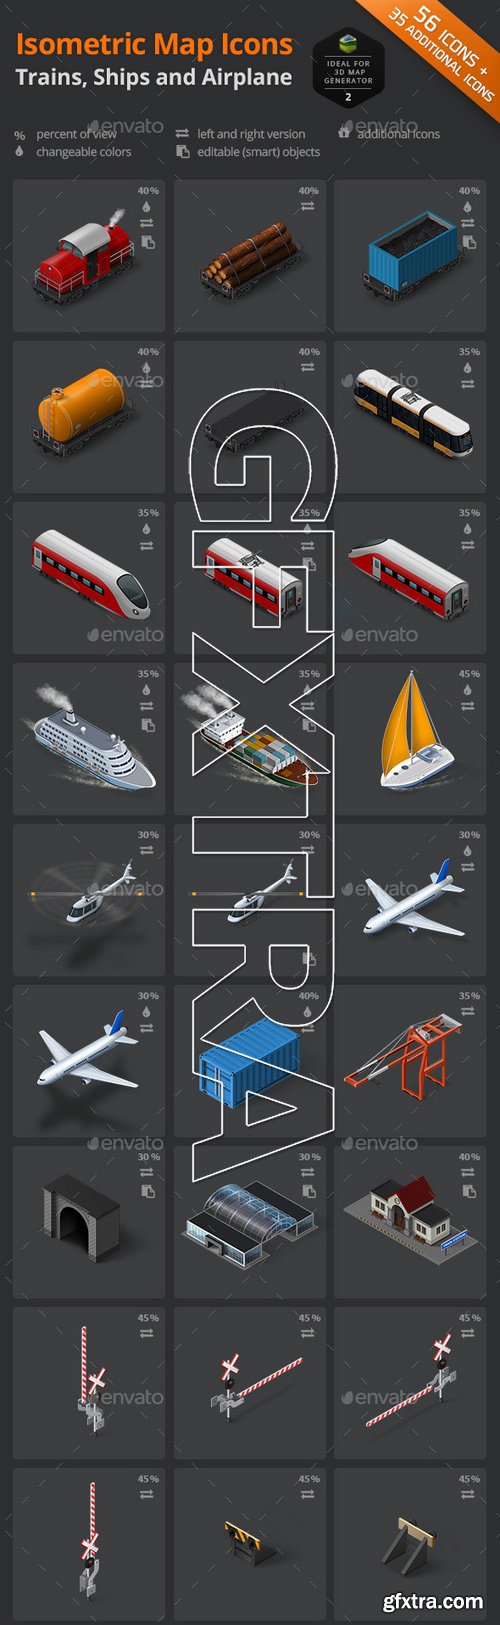 GraphicRiver - Isometric Map Icons - Trains, Ships and Airplane 10184416